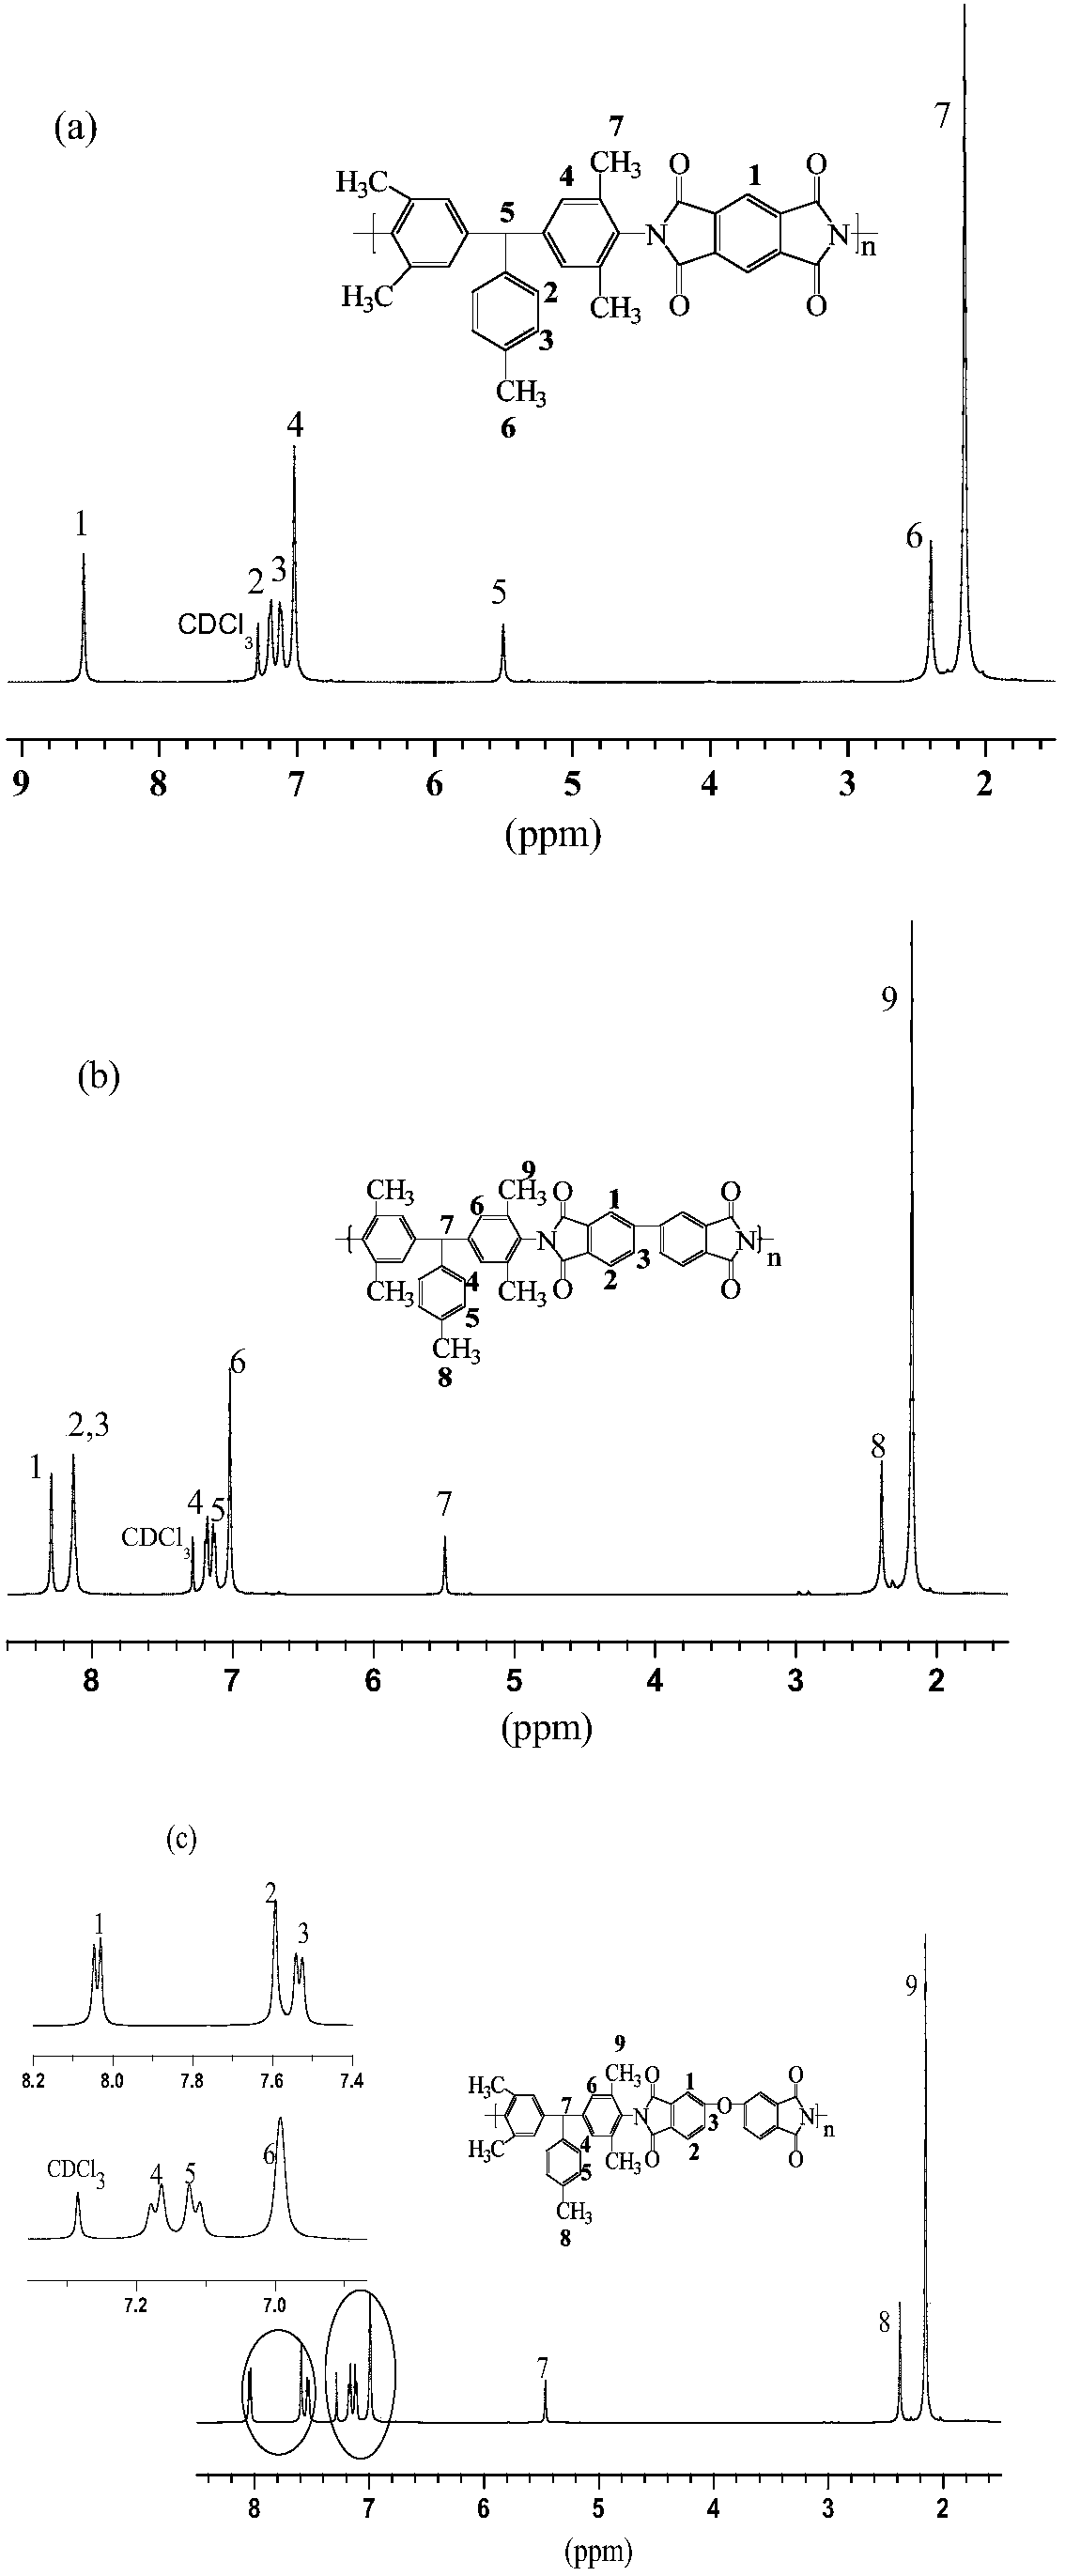 Aromatic diamine and polyimide containing tolyl and non-coplanar structure and their preparation methods